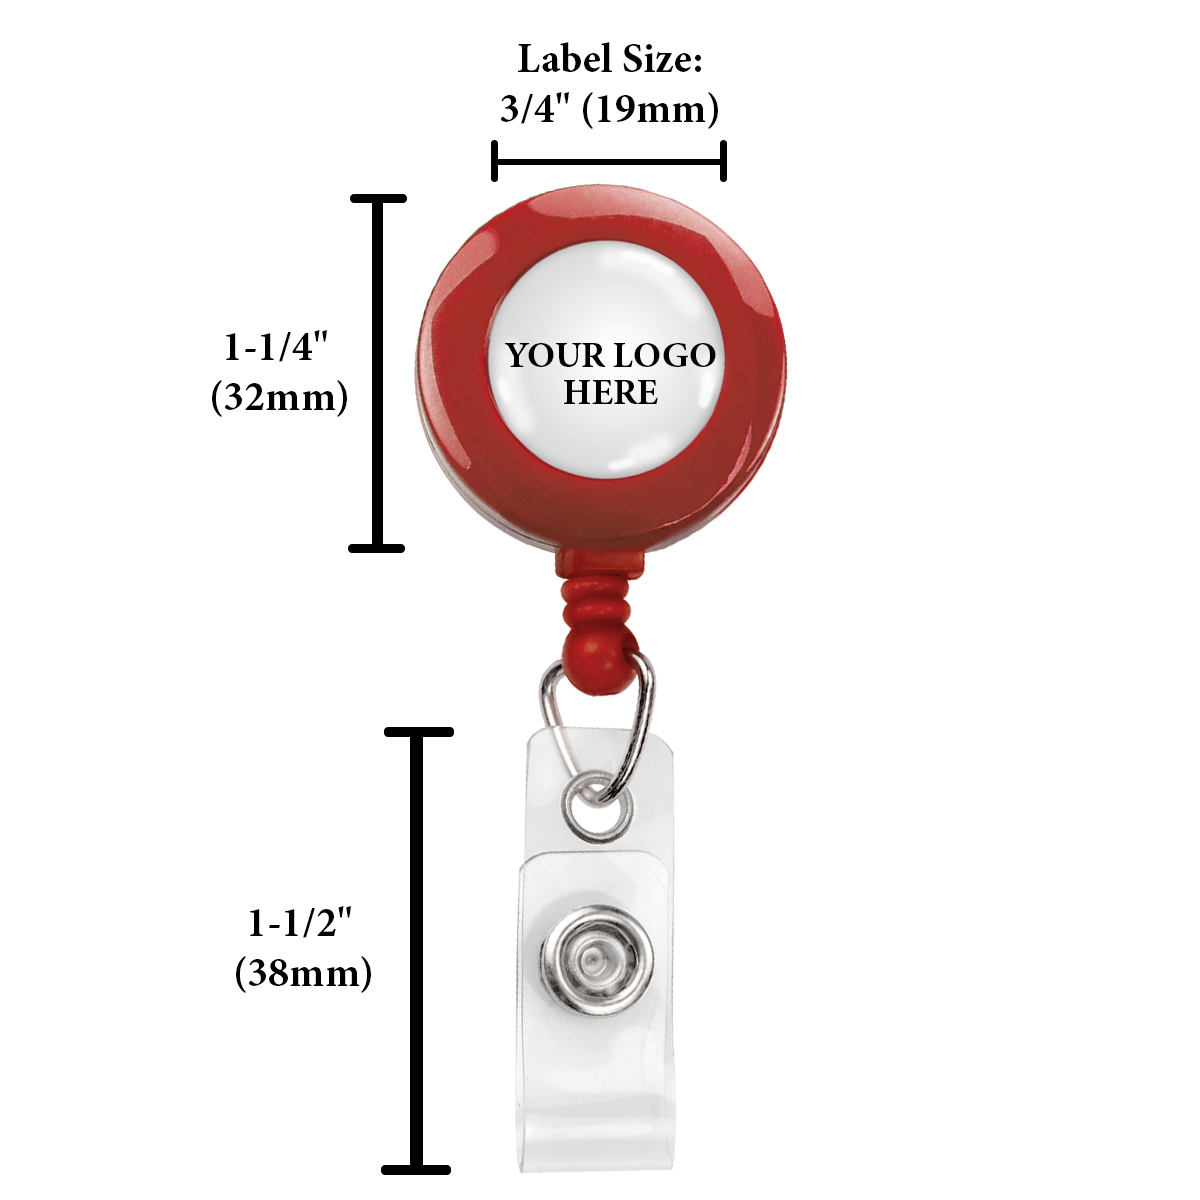 A red Custom Printed Retractable Badge Reels With Belt Clip - Personalize with Your Brand Logo, labeled "Your Logo Here" in the circular center. Dimensions are noted as 1-1/4" (32mm) for the reel and 1-1/2" (38mm) for the clip length, with a label size of 3/4" (19mm). Ideal for promoting brand awareness with full-color graphics.